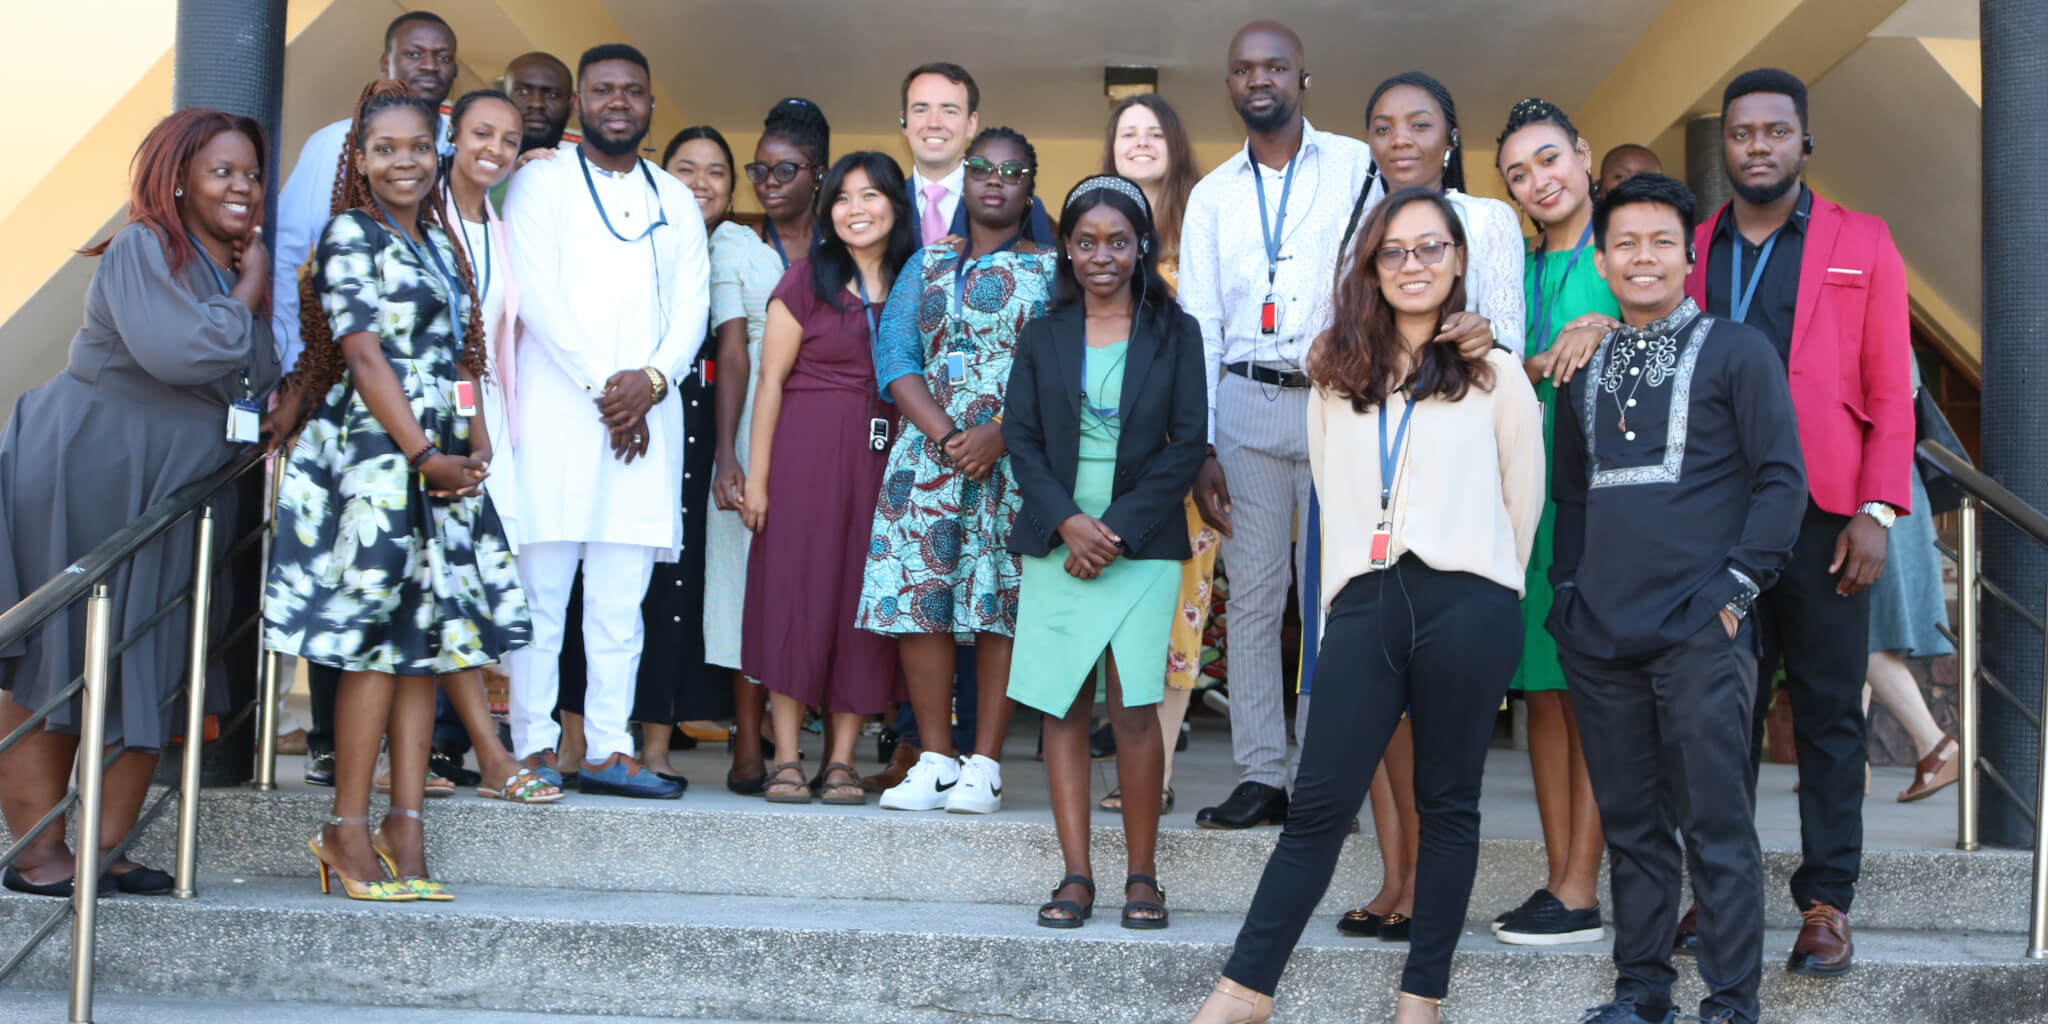 New class of Global Mission Fellows commissioned in Mozambique